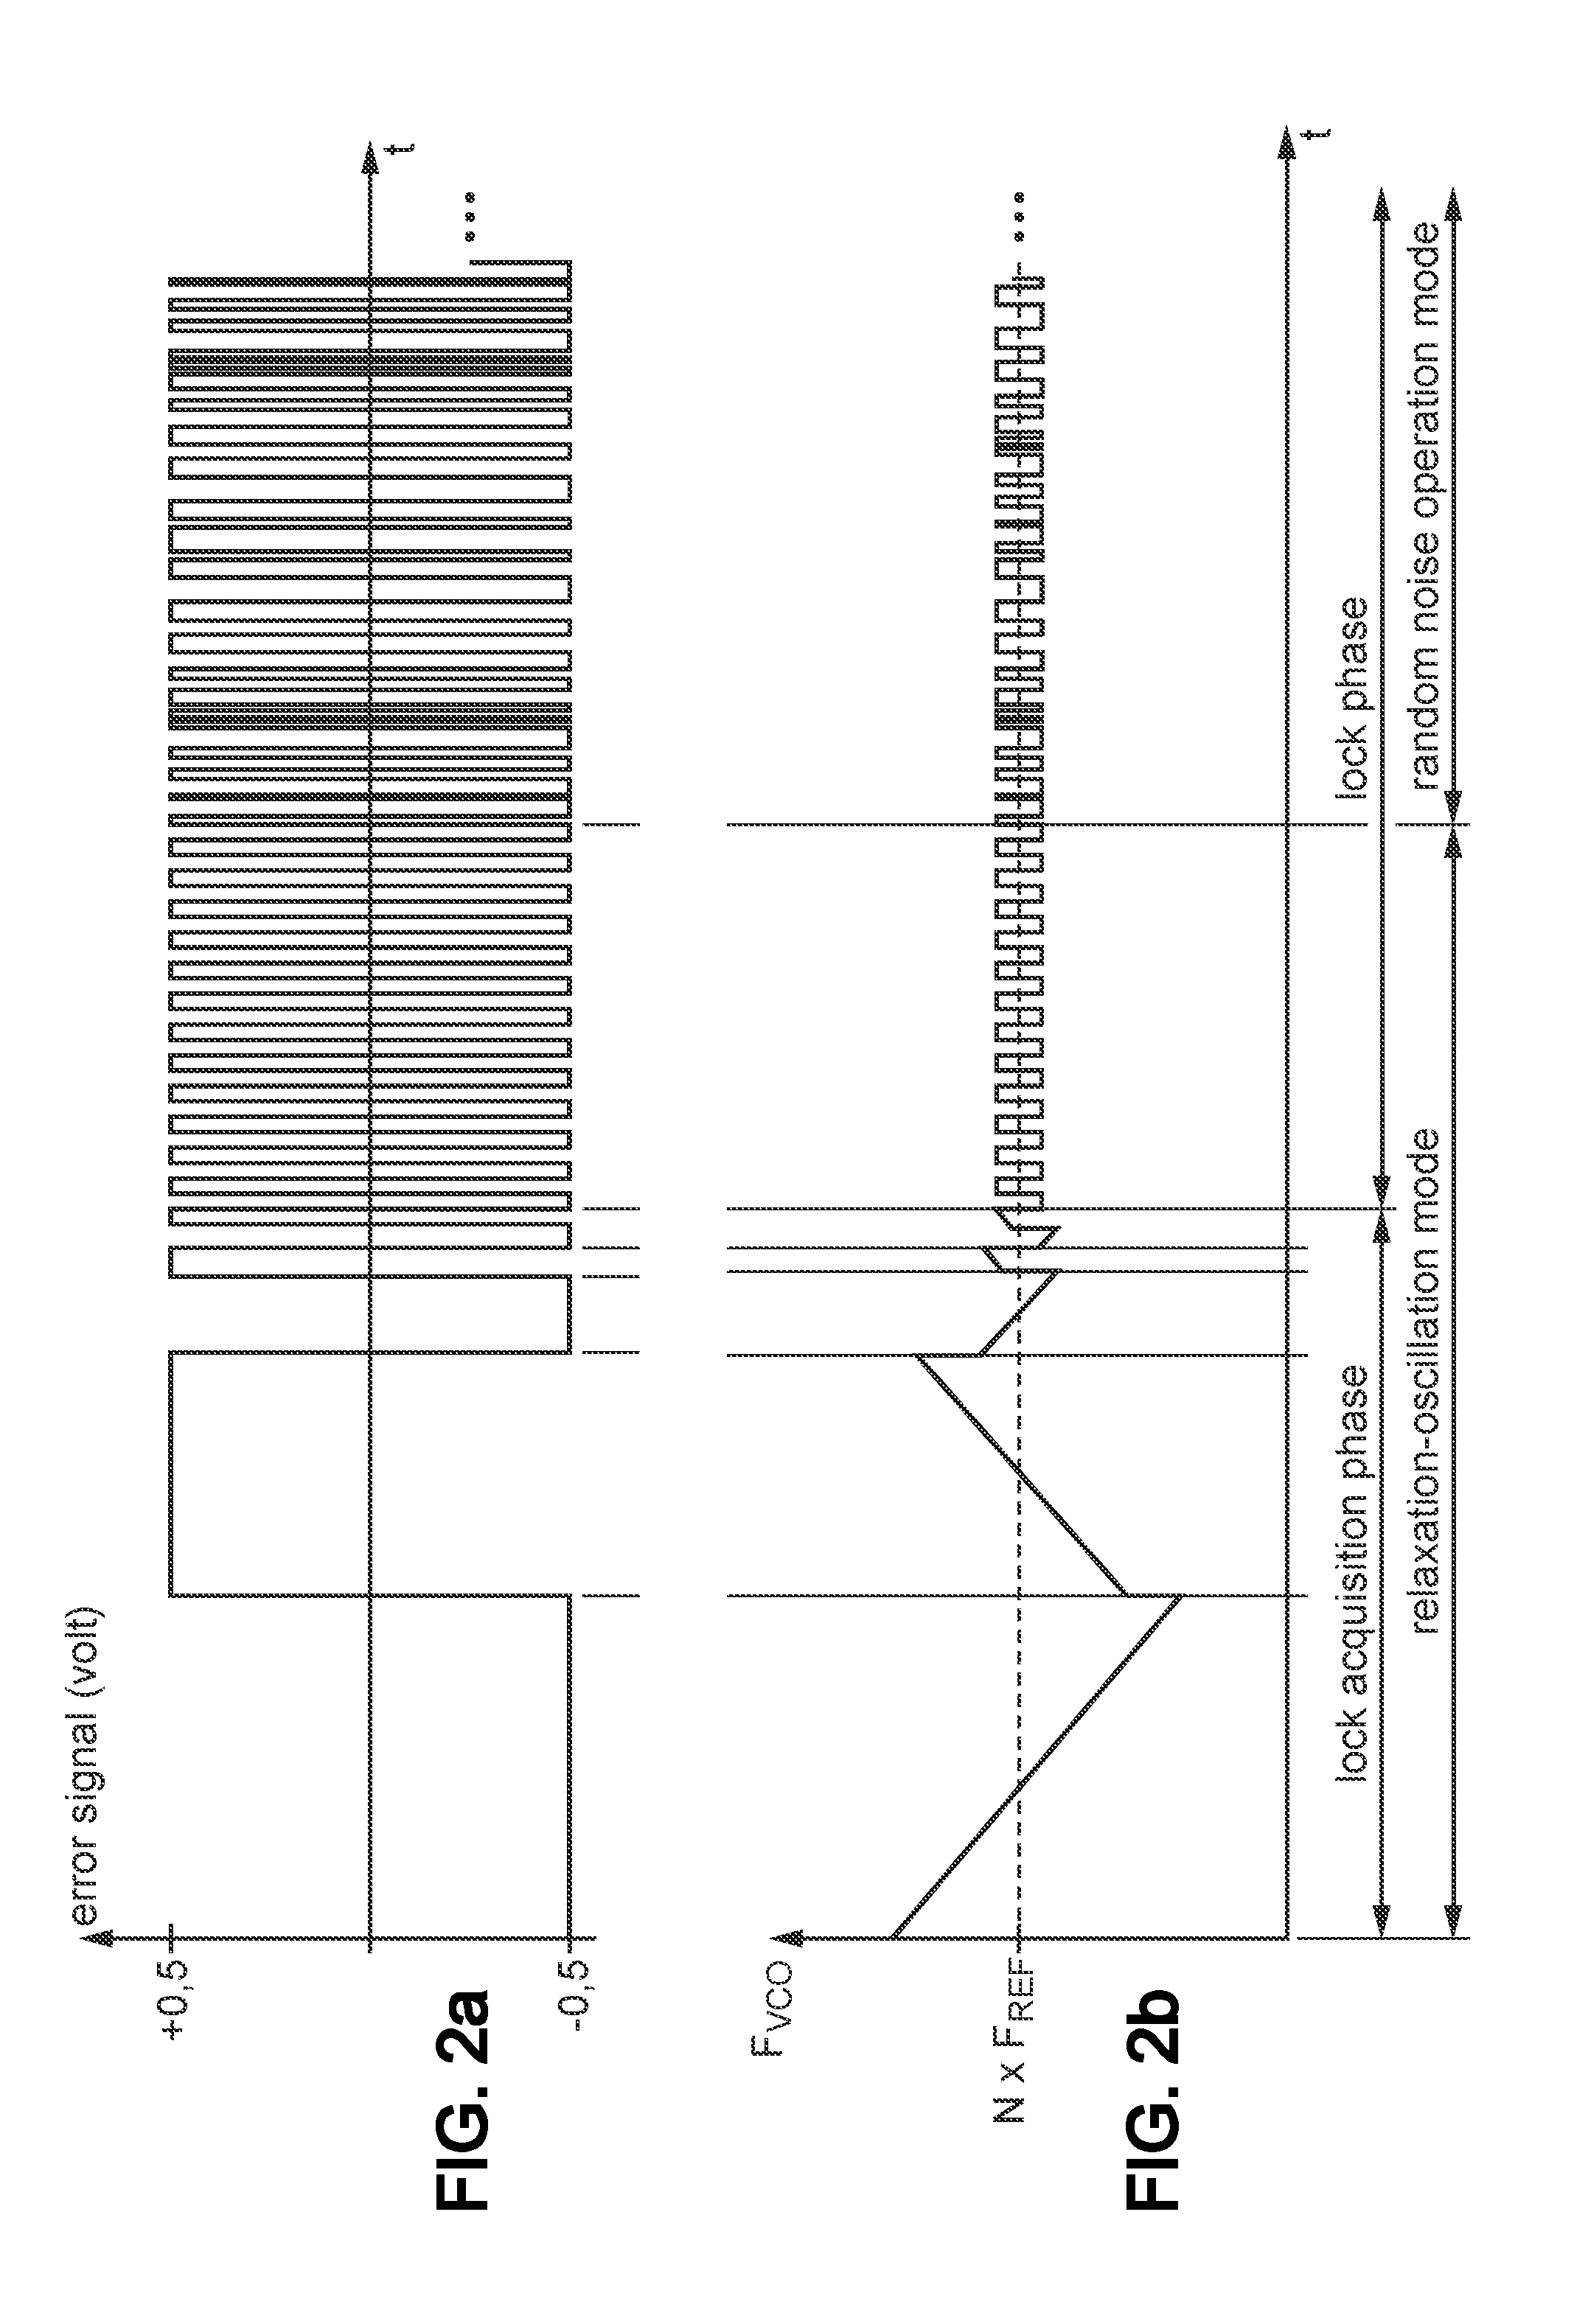 Phase-locked loop device with managed transition to random noise operation mode